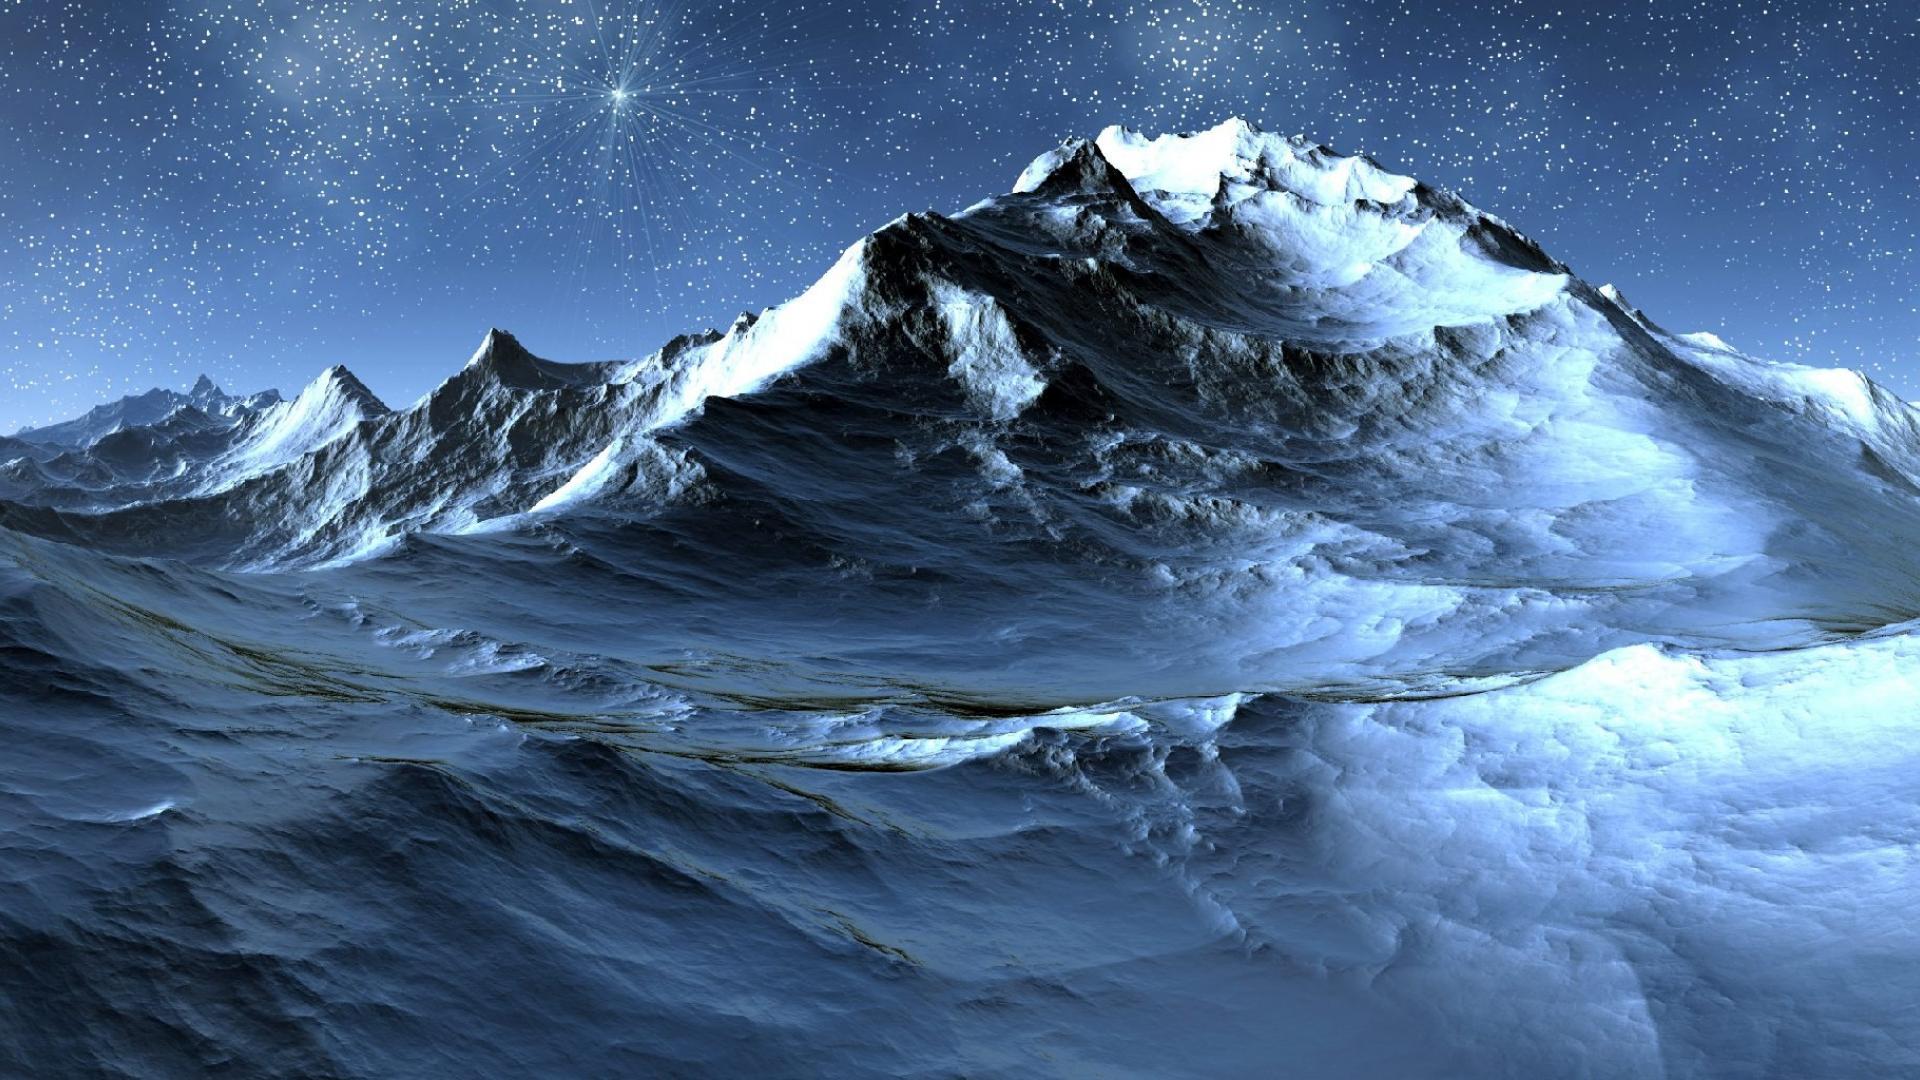 Night ice mountain wallpaper images